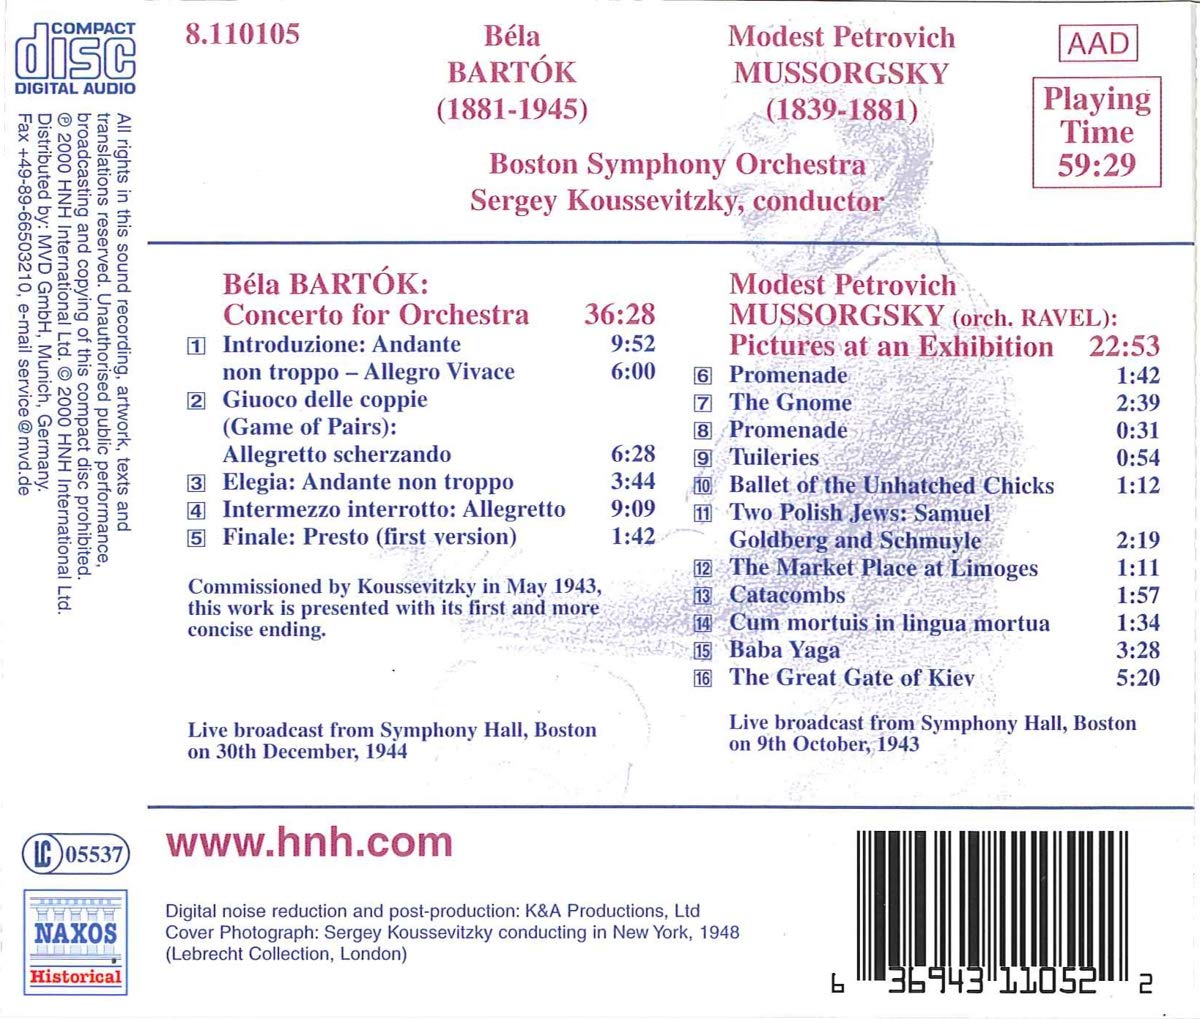 Bartok: Concerto for Orchestra / Mussorgsky: Pictures at an Exhibition - slide-1